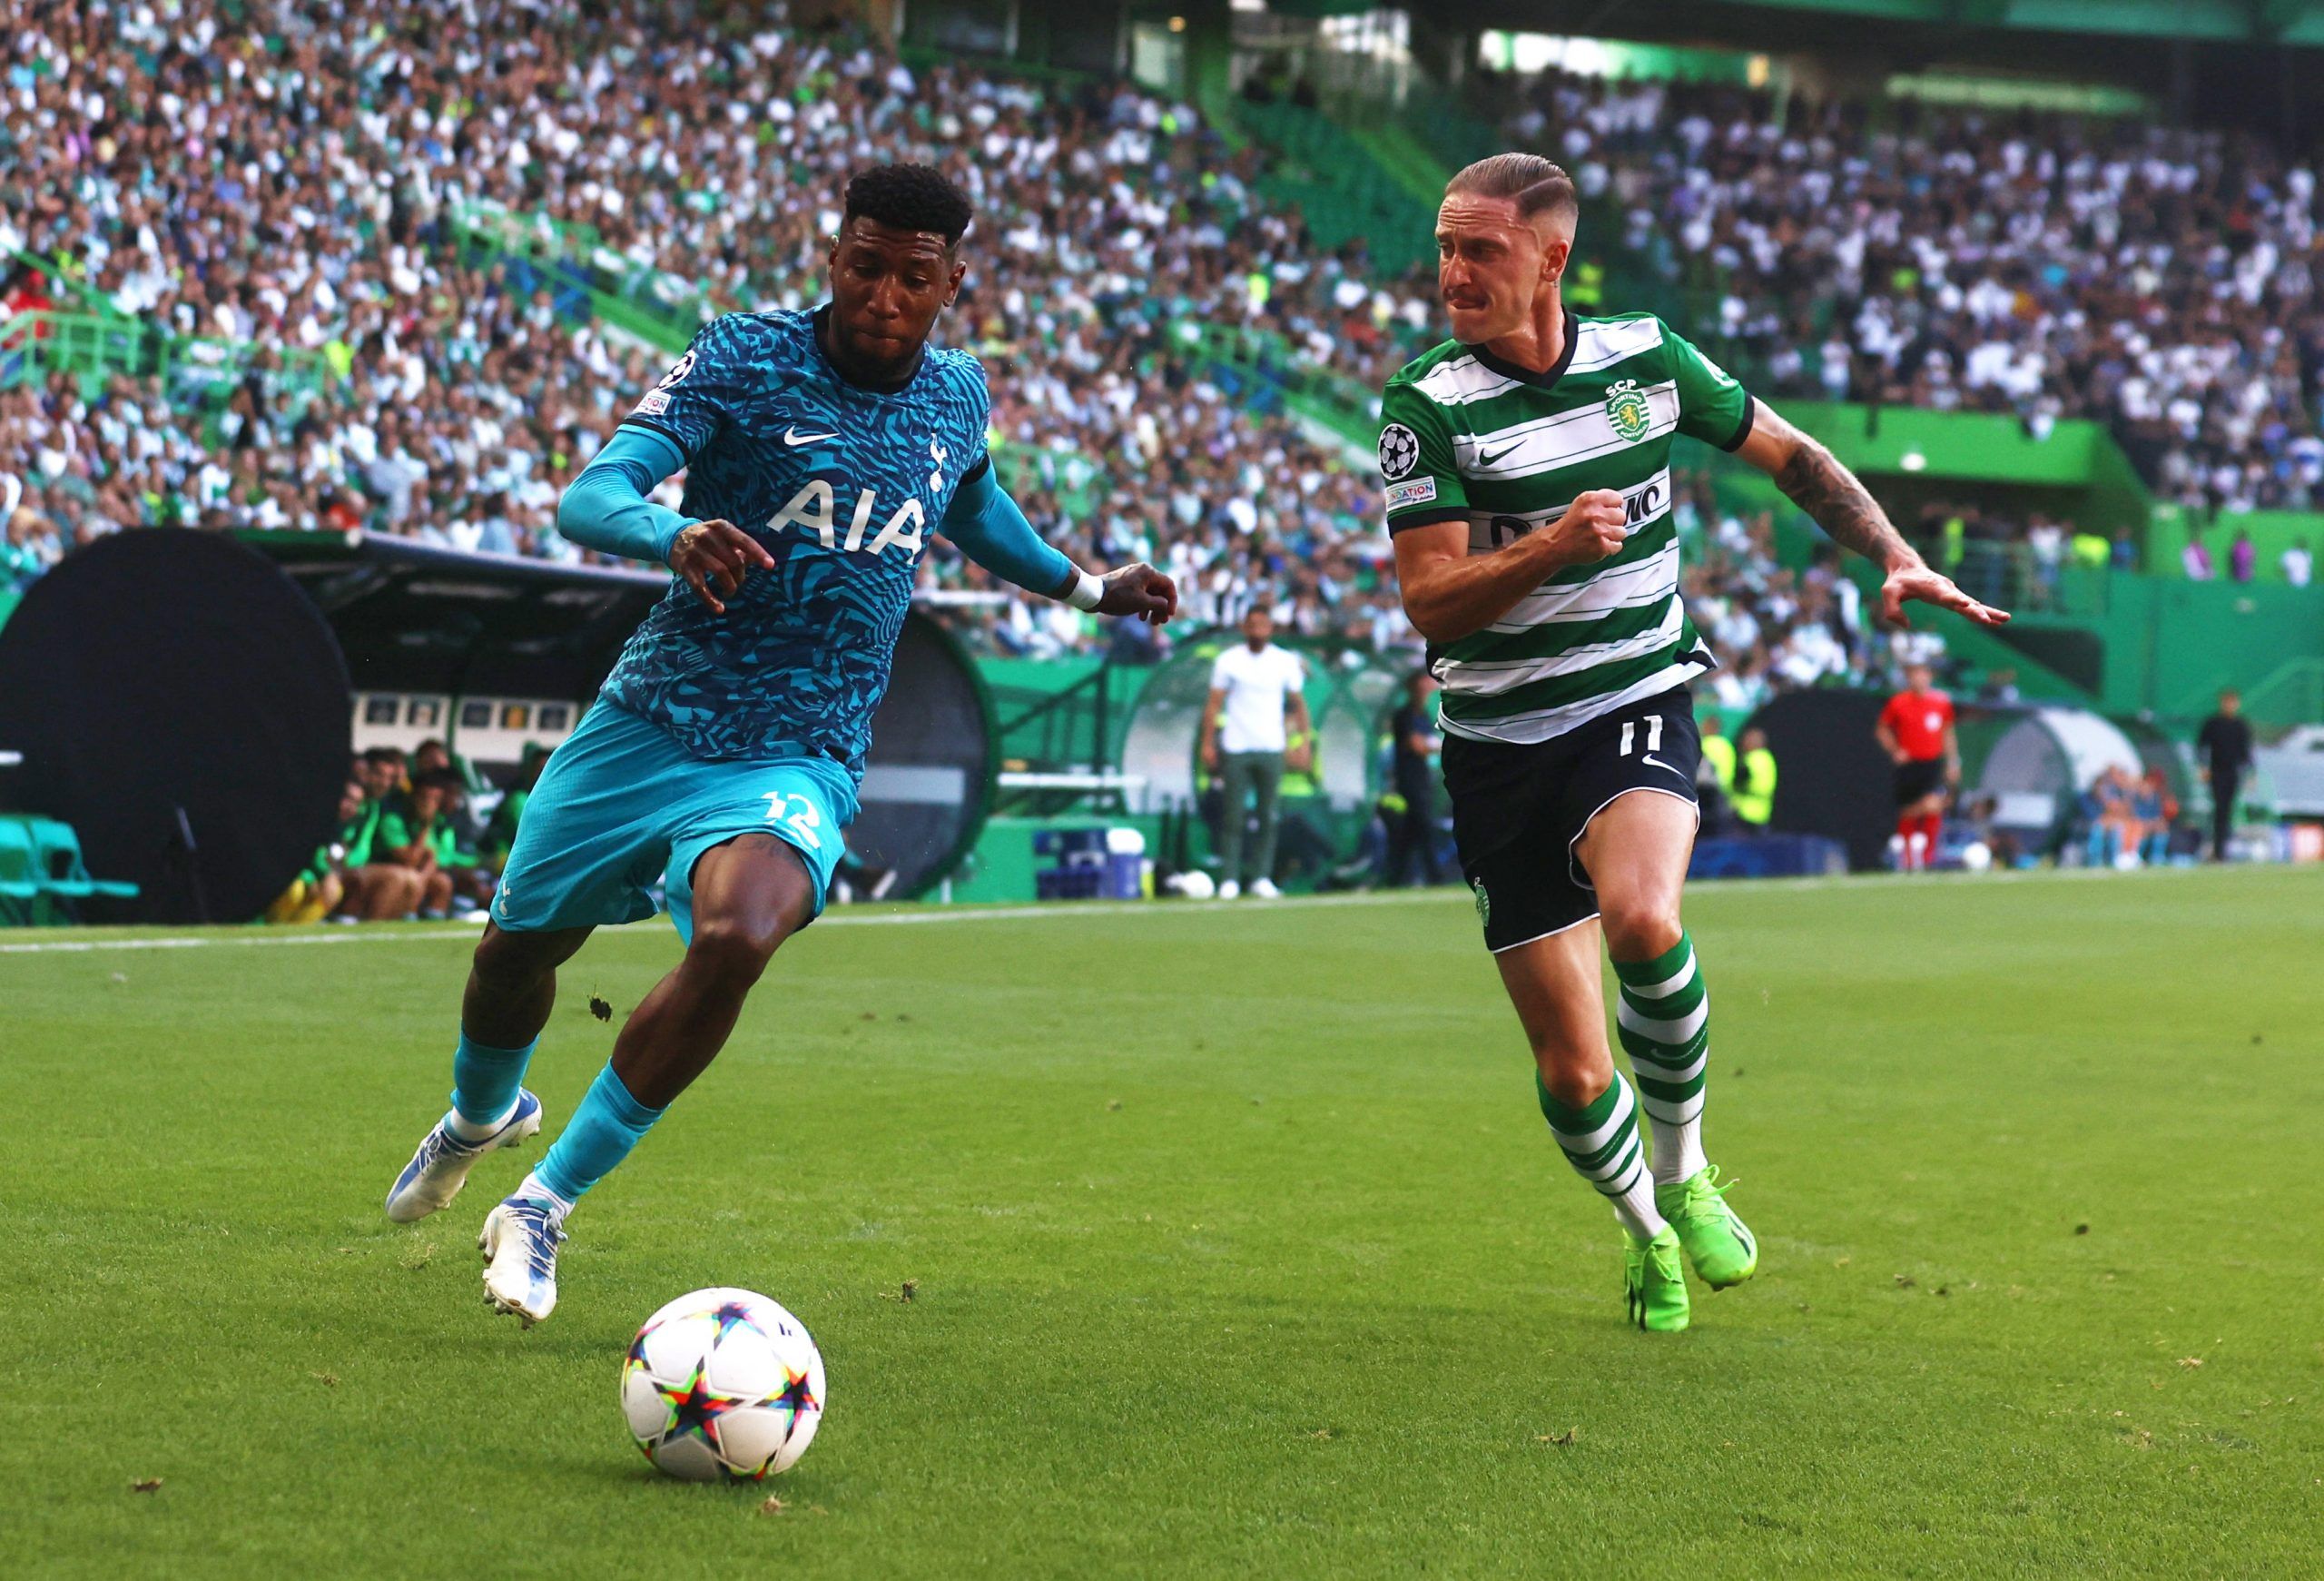 Tottenham Hotspur's Emerson Royal in action with Sporting CP's Nuno Santos